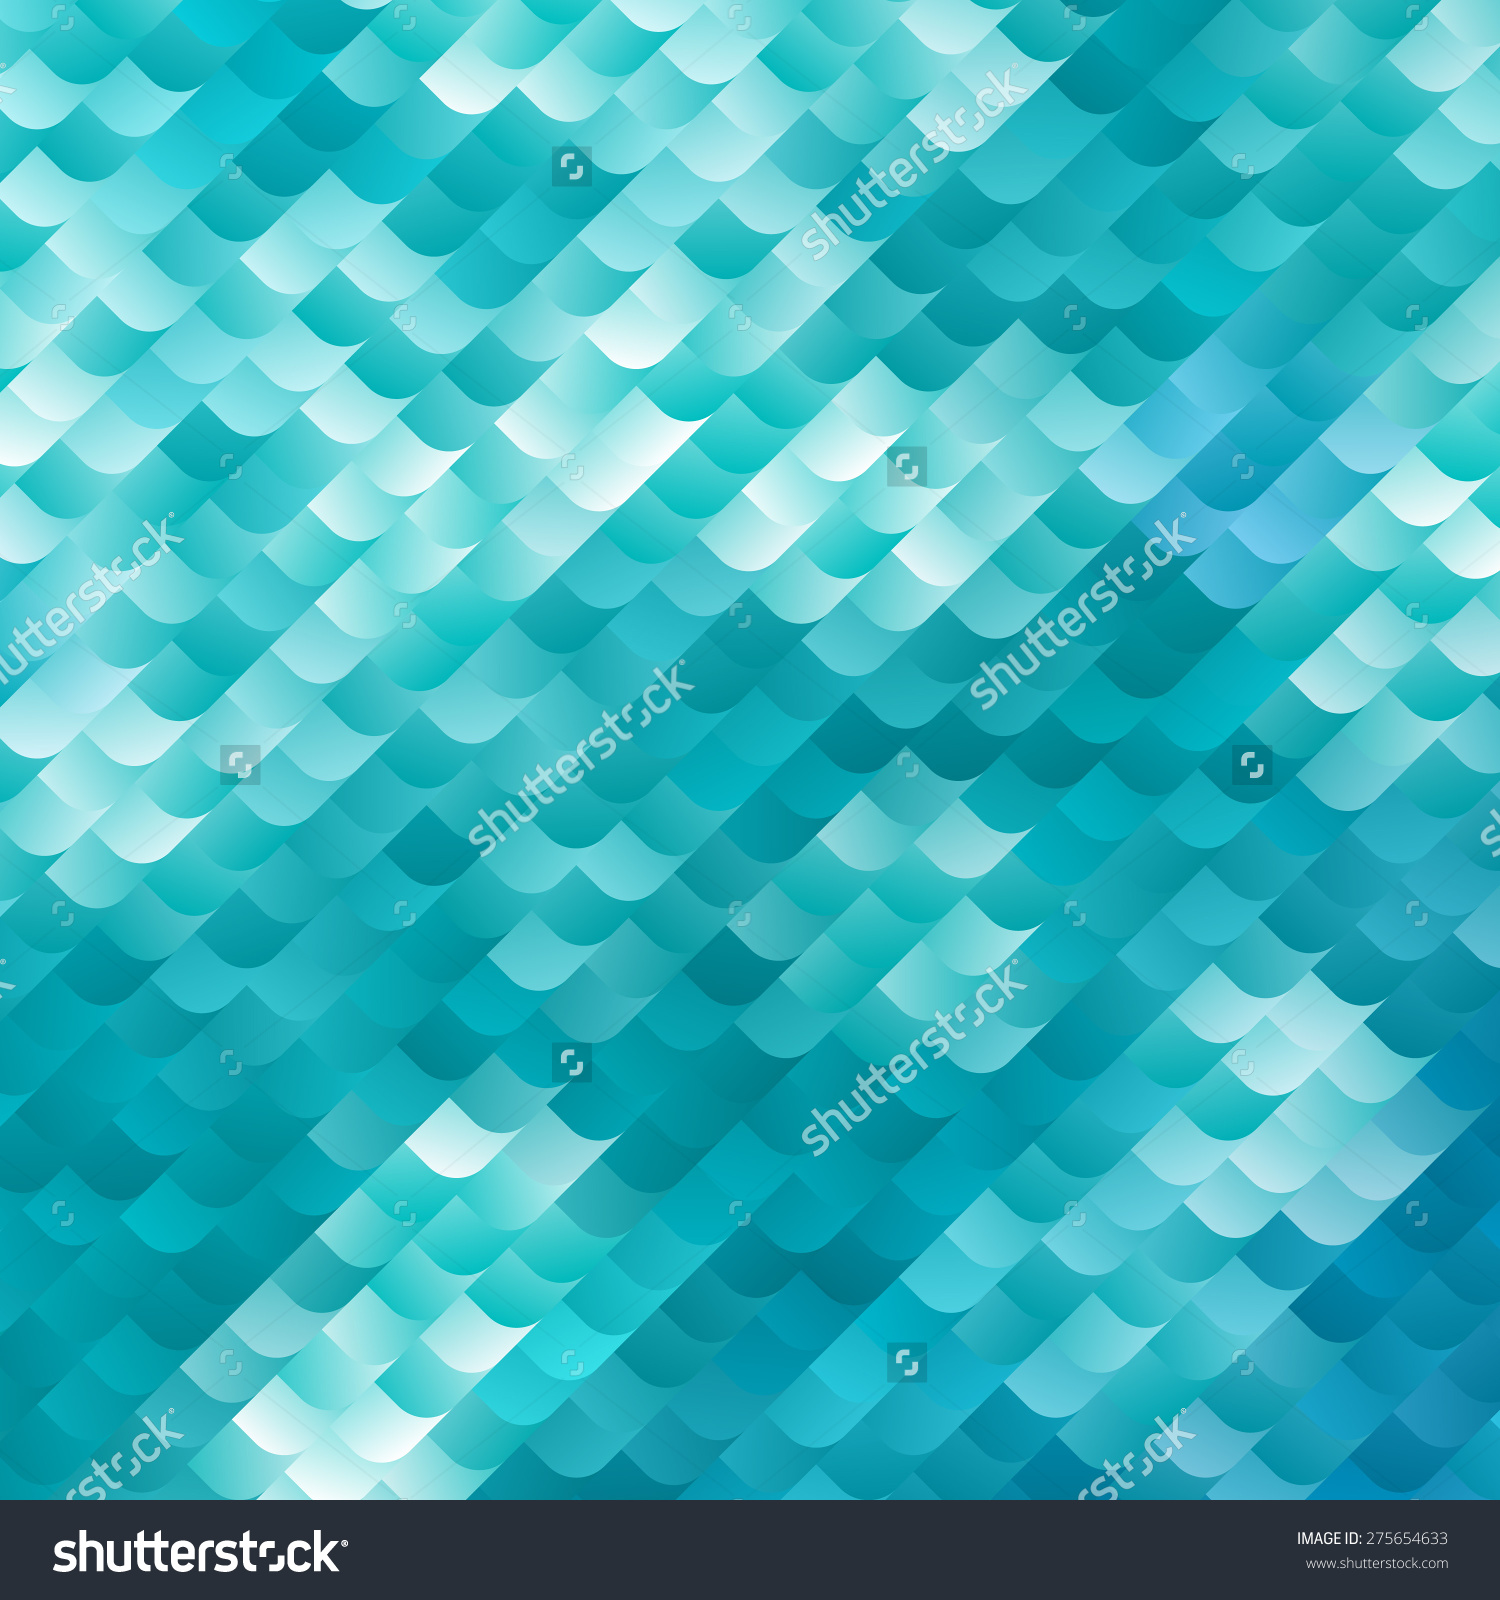 Blue and White Dynamic Background Vector Mosaic Texture Abstract 1500x1600